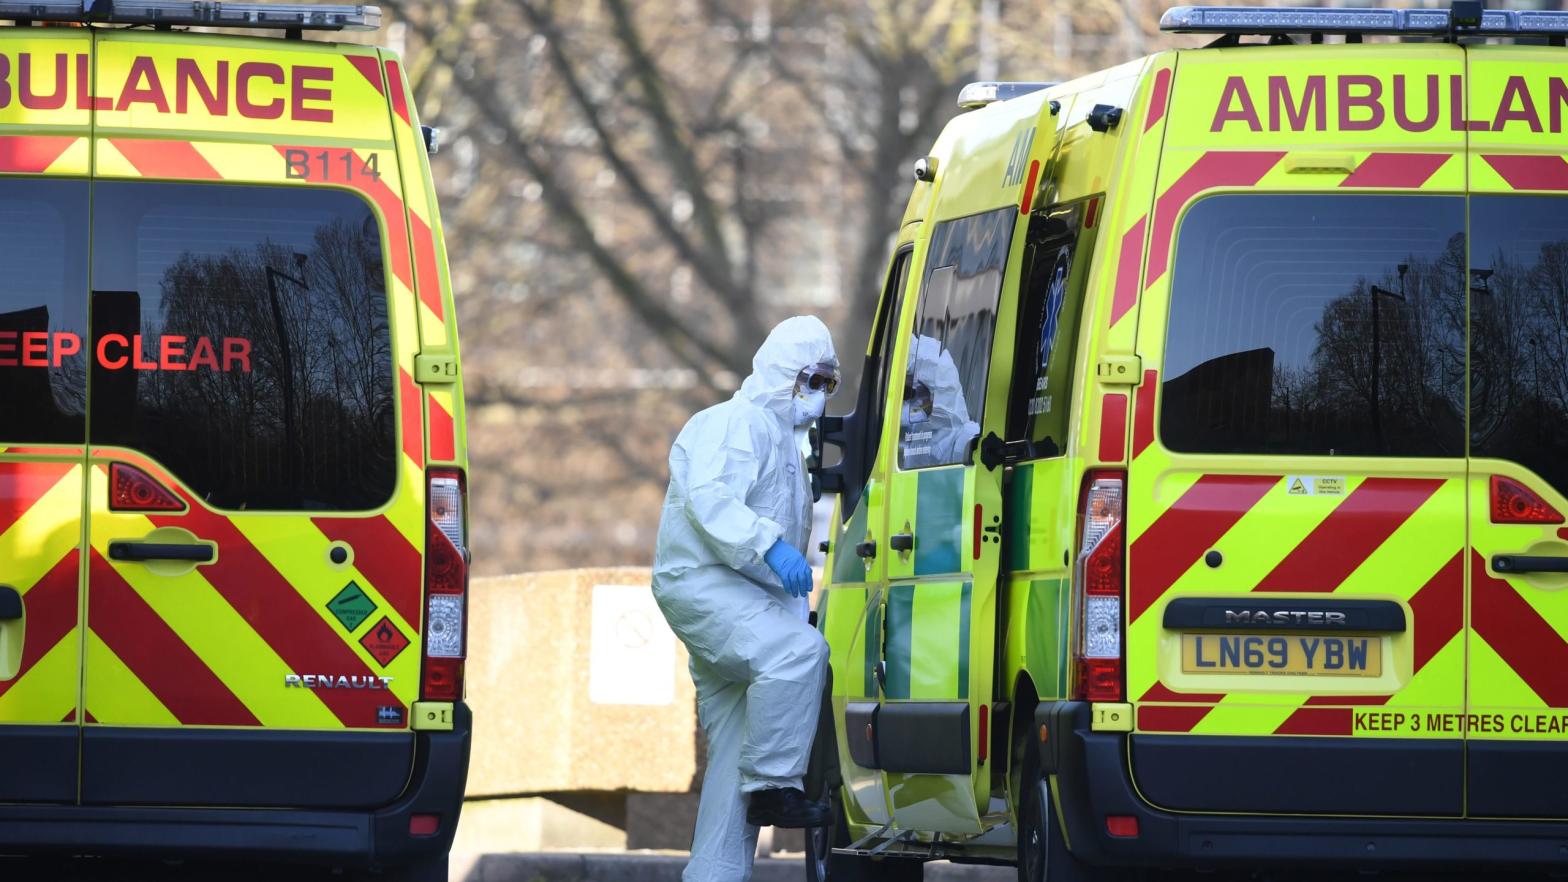 A health care worker getting into an ambulance at St Thomas' Hospital in London on March 24, 2020. (Photo: Daniel Leal-Olivas/AFP, Getty Images)